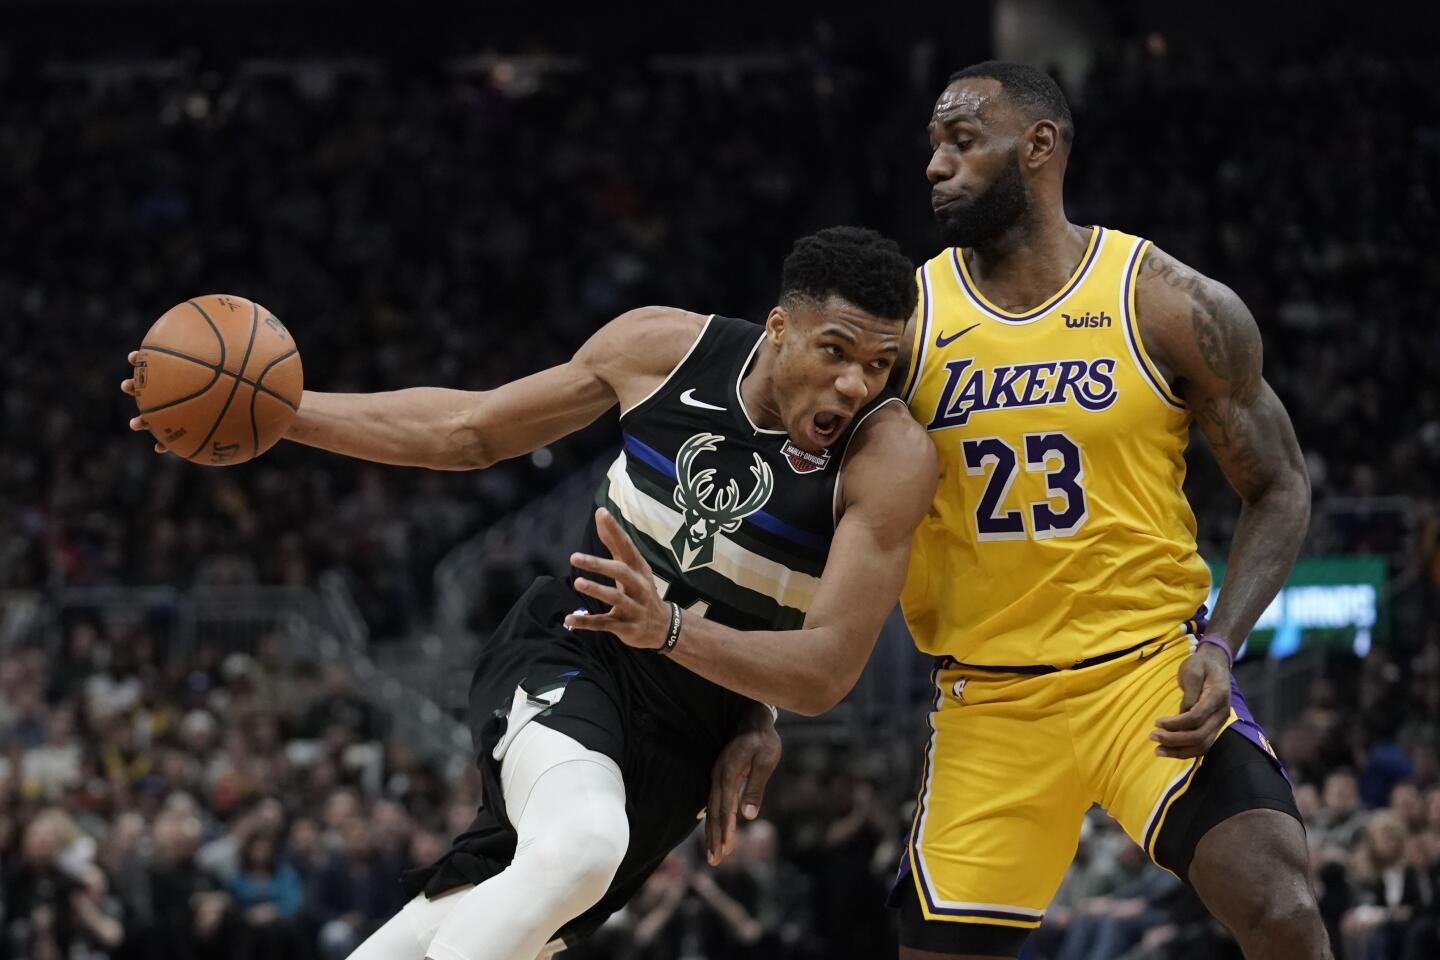 All-Access: Bucks vs. Lakers, The Unseen Footage From Giannis vs. LeBron